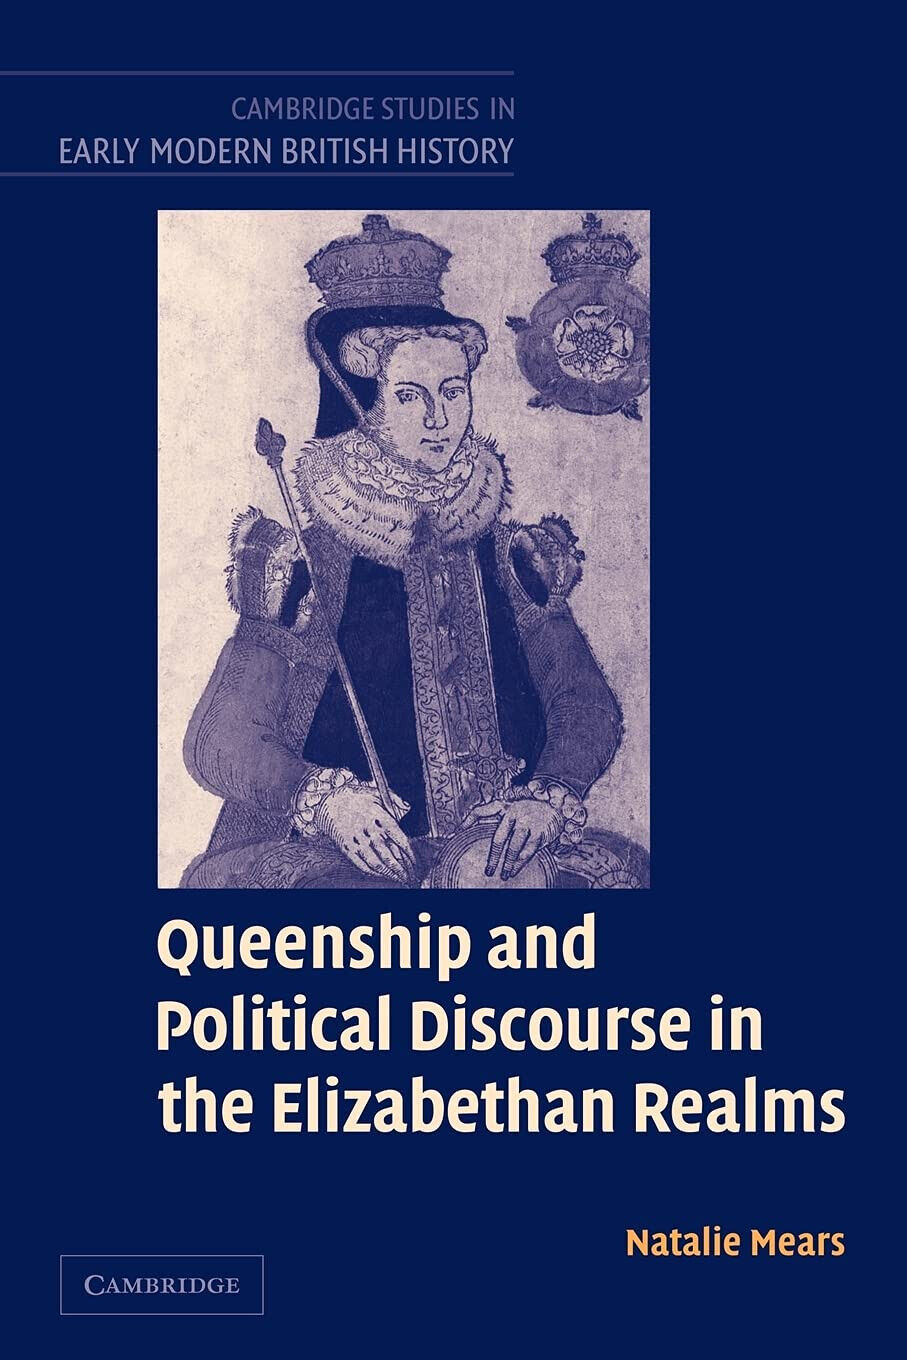 Queenship and Political Discourse in the Elizabethan Realms - Natalie Mears